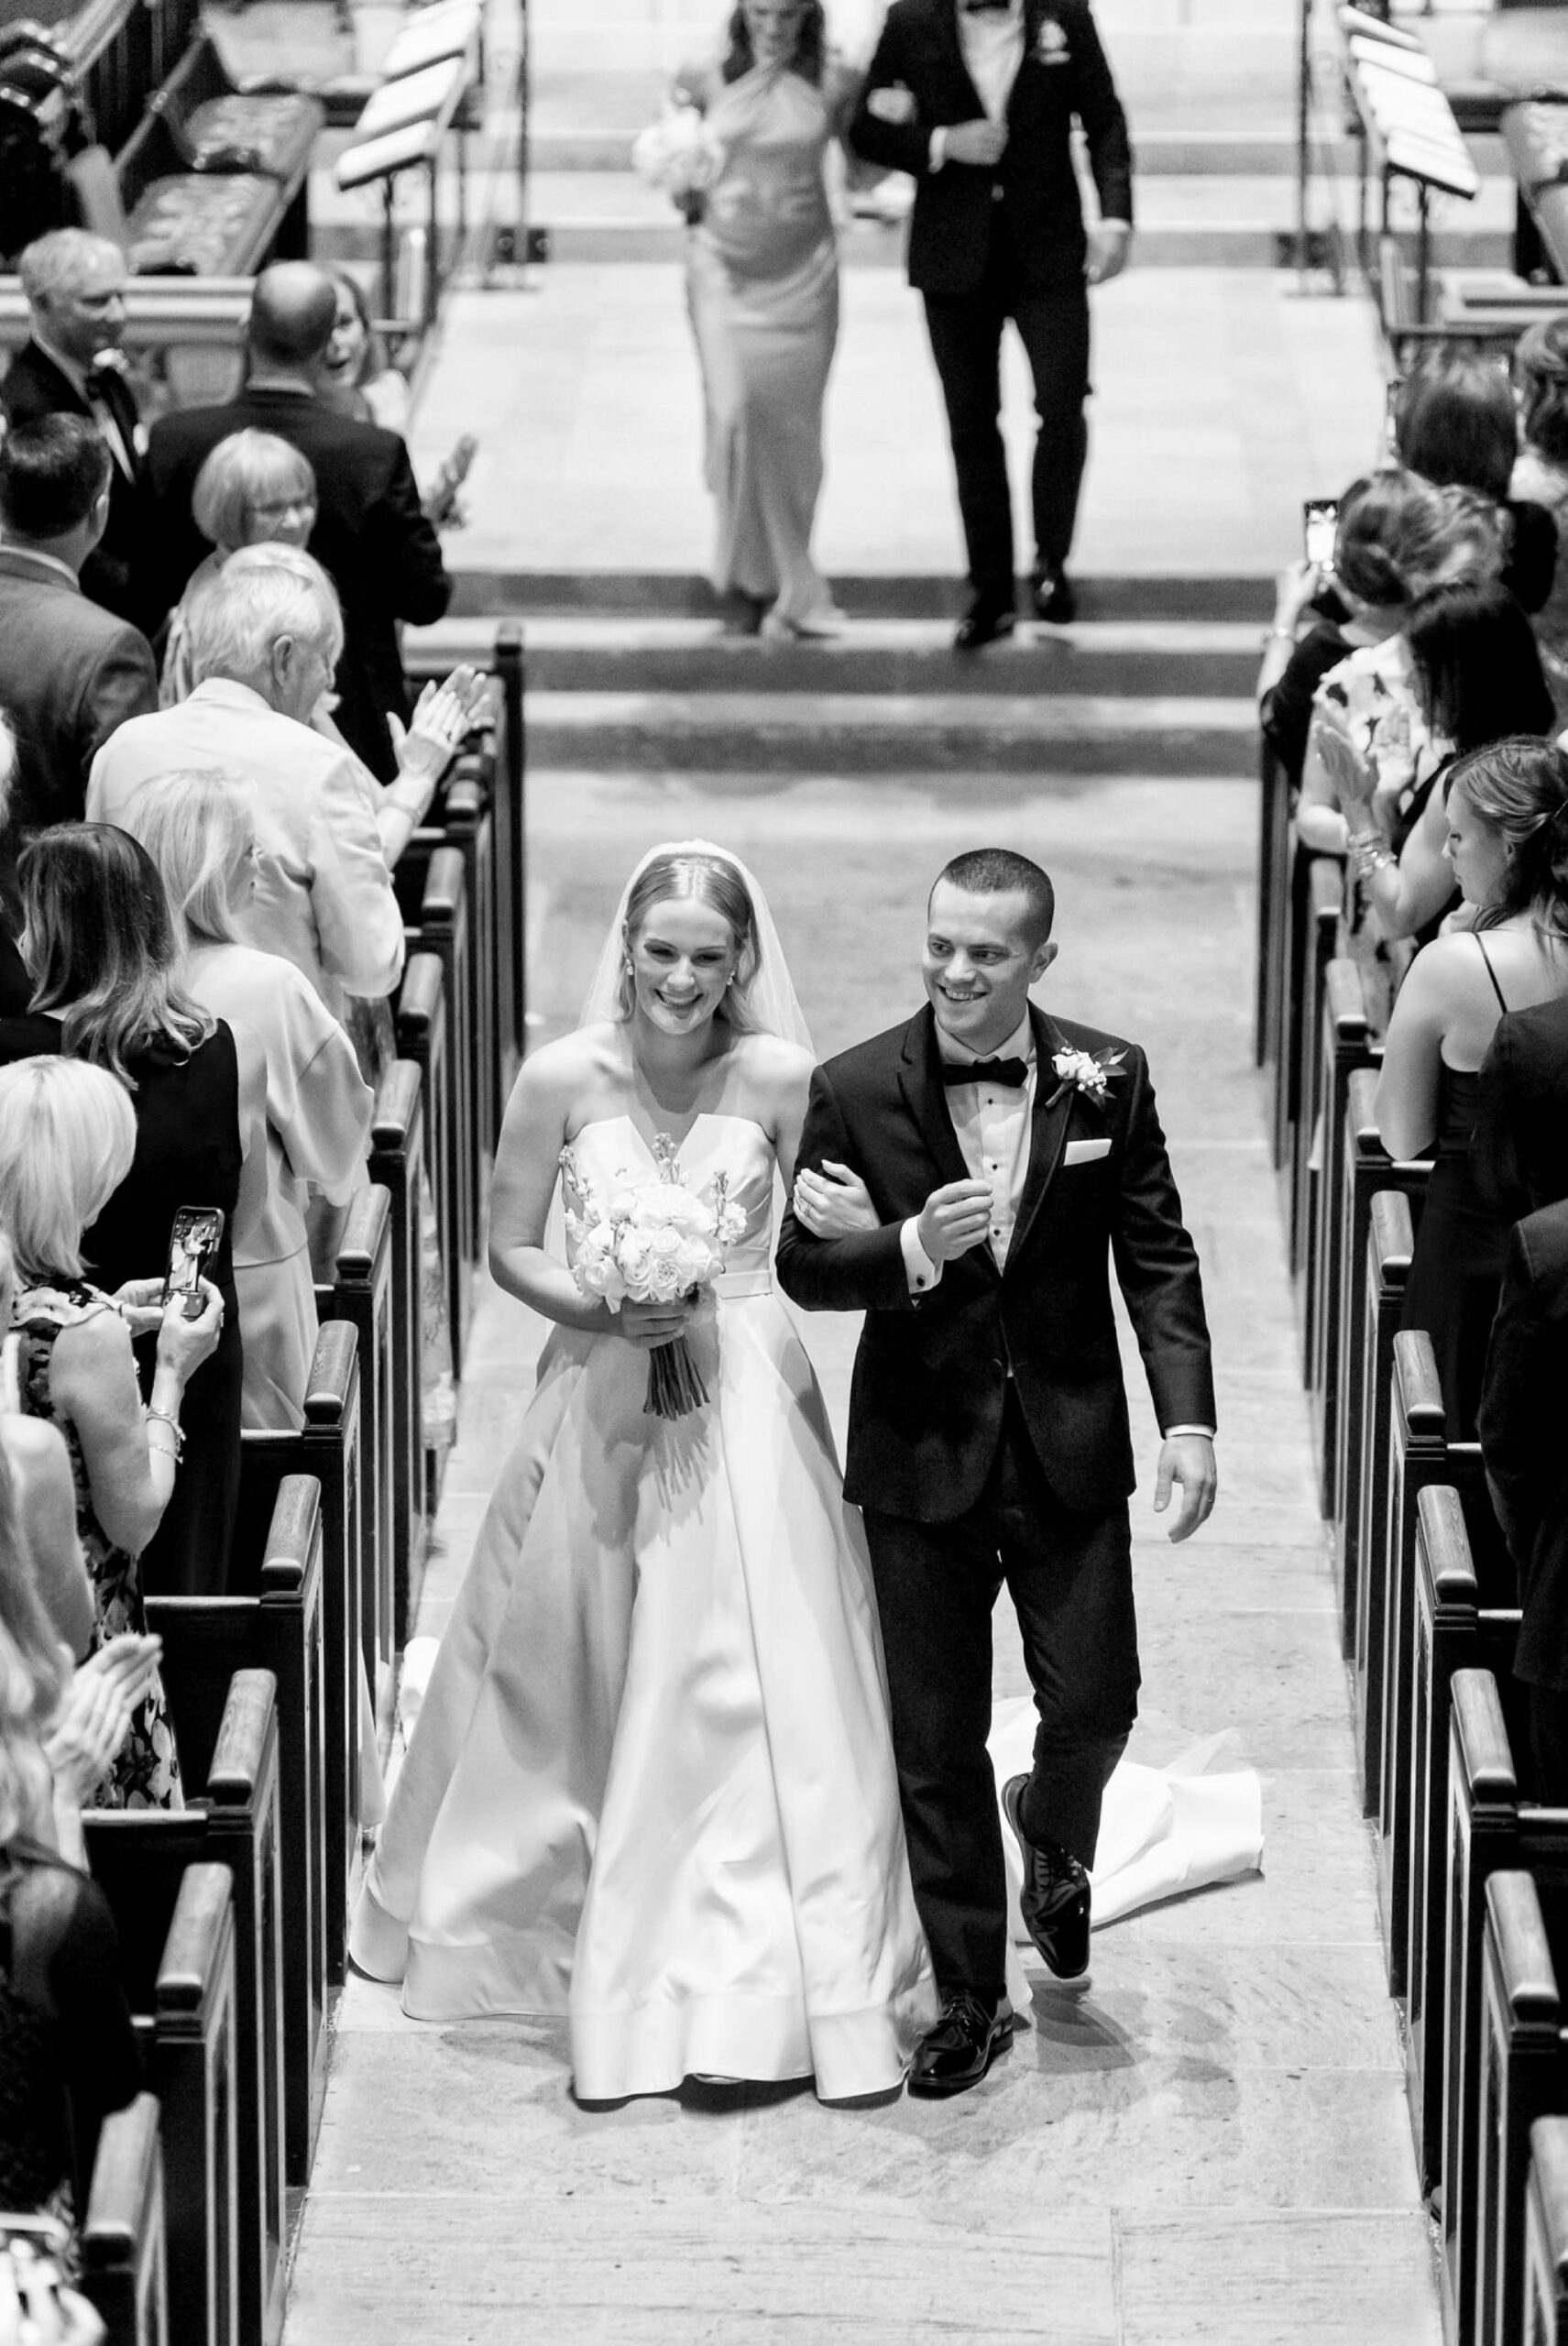 The bride and groom smile, walking down the aisle after their wedding at Christ Church Grosse Pointe.